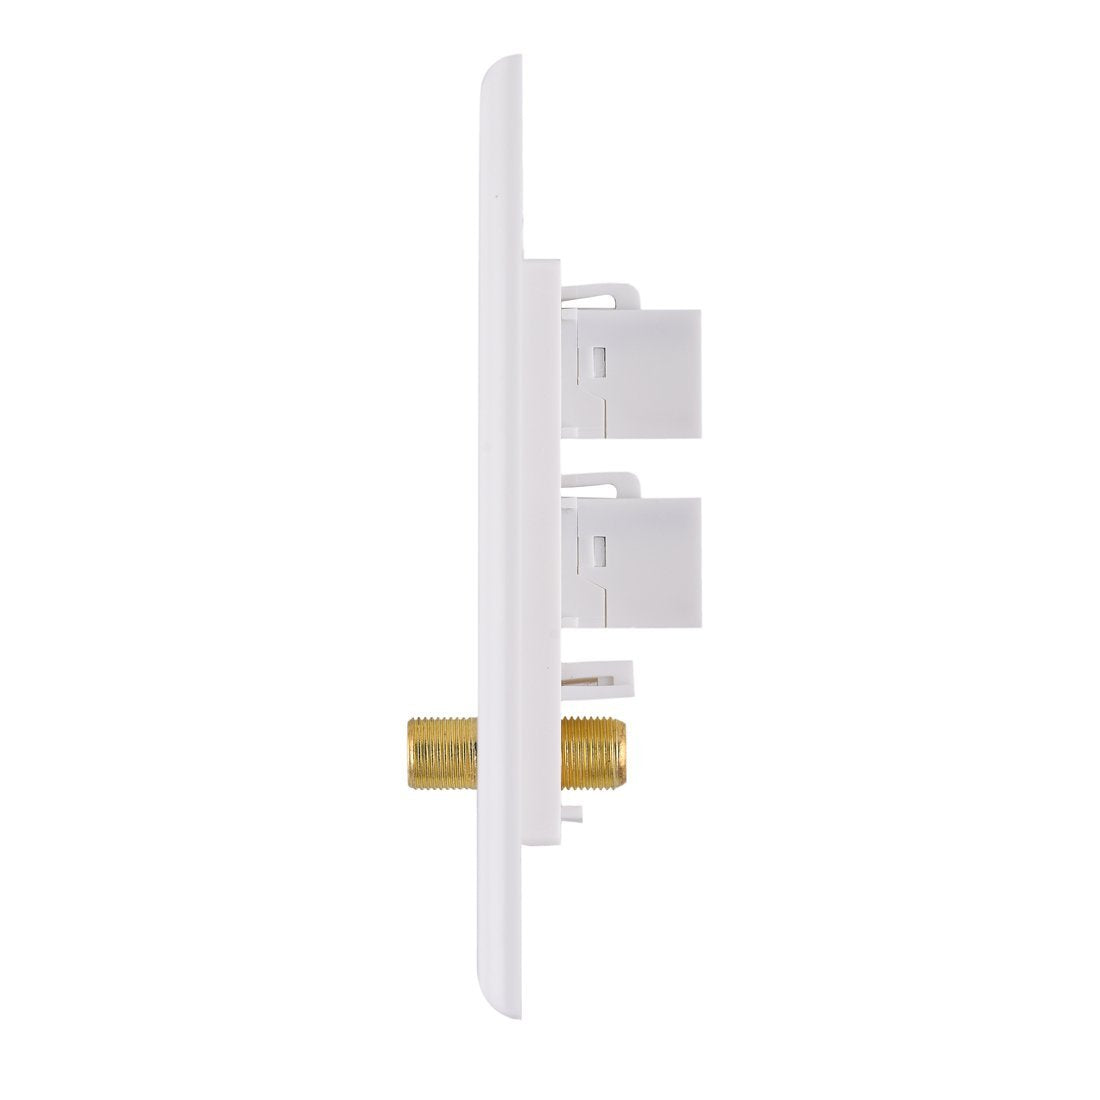 Ethernet RJ45 Wall Plate - Cat6 F Type Wall Plate, 1 Port Cat6 Keystone and 1 Port F Type Connector Coax Keystone - White